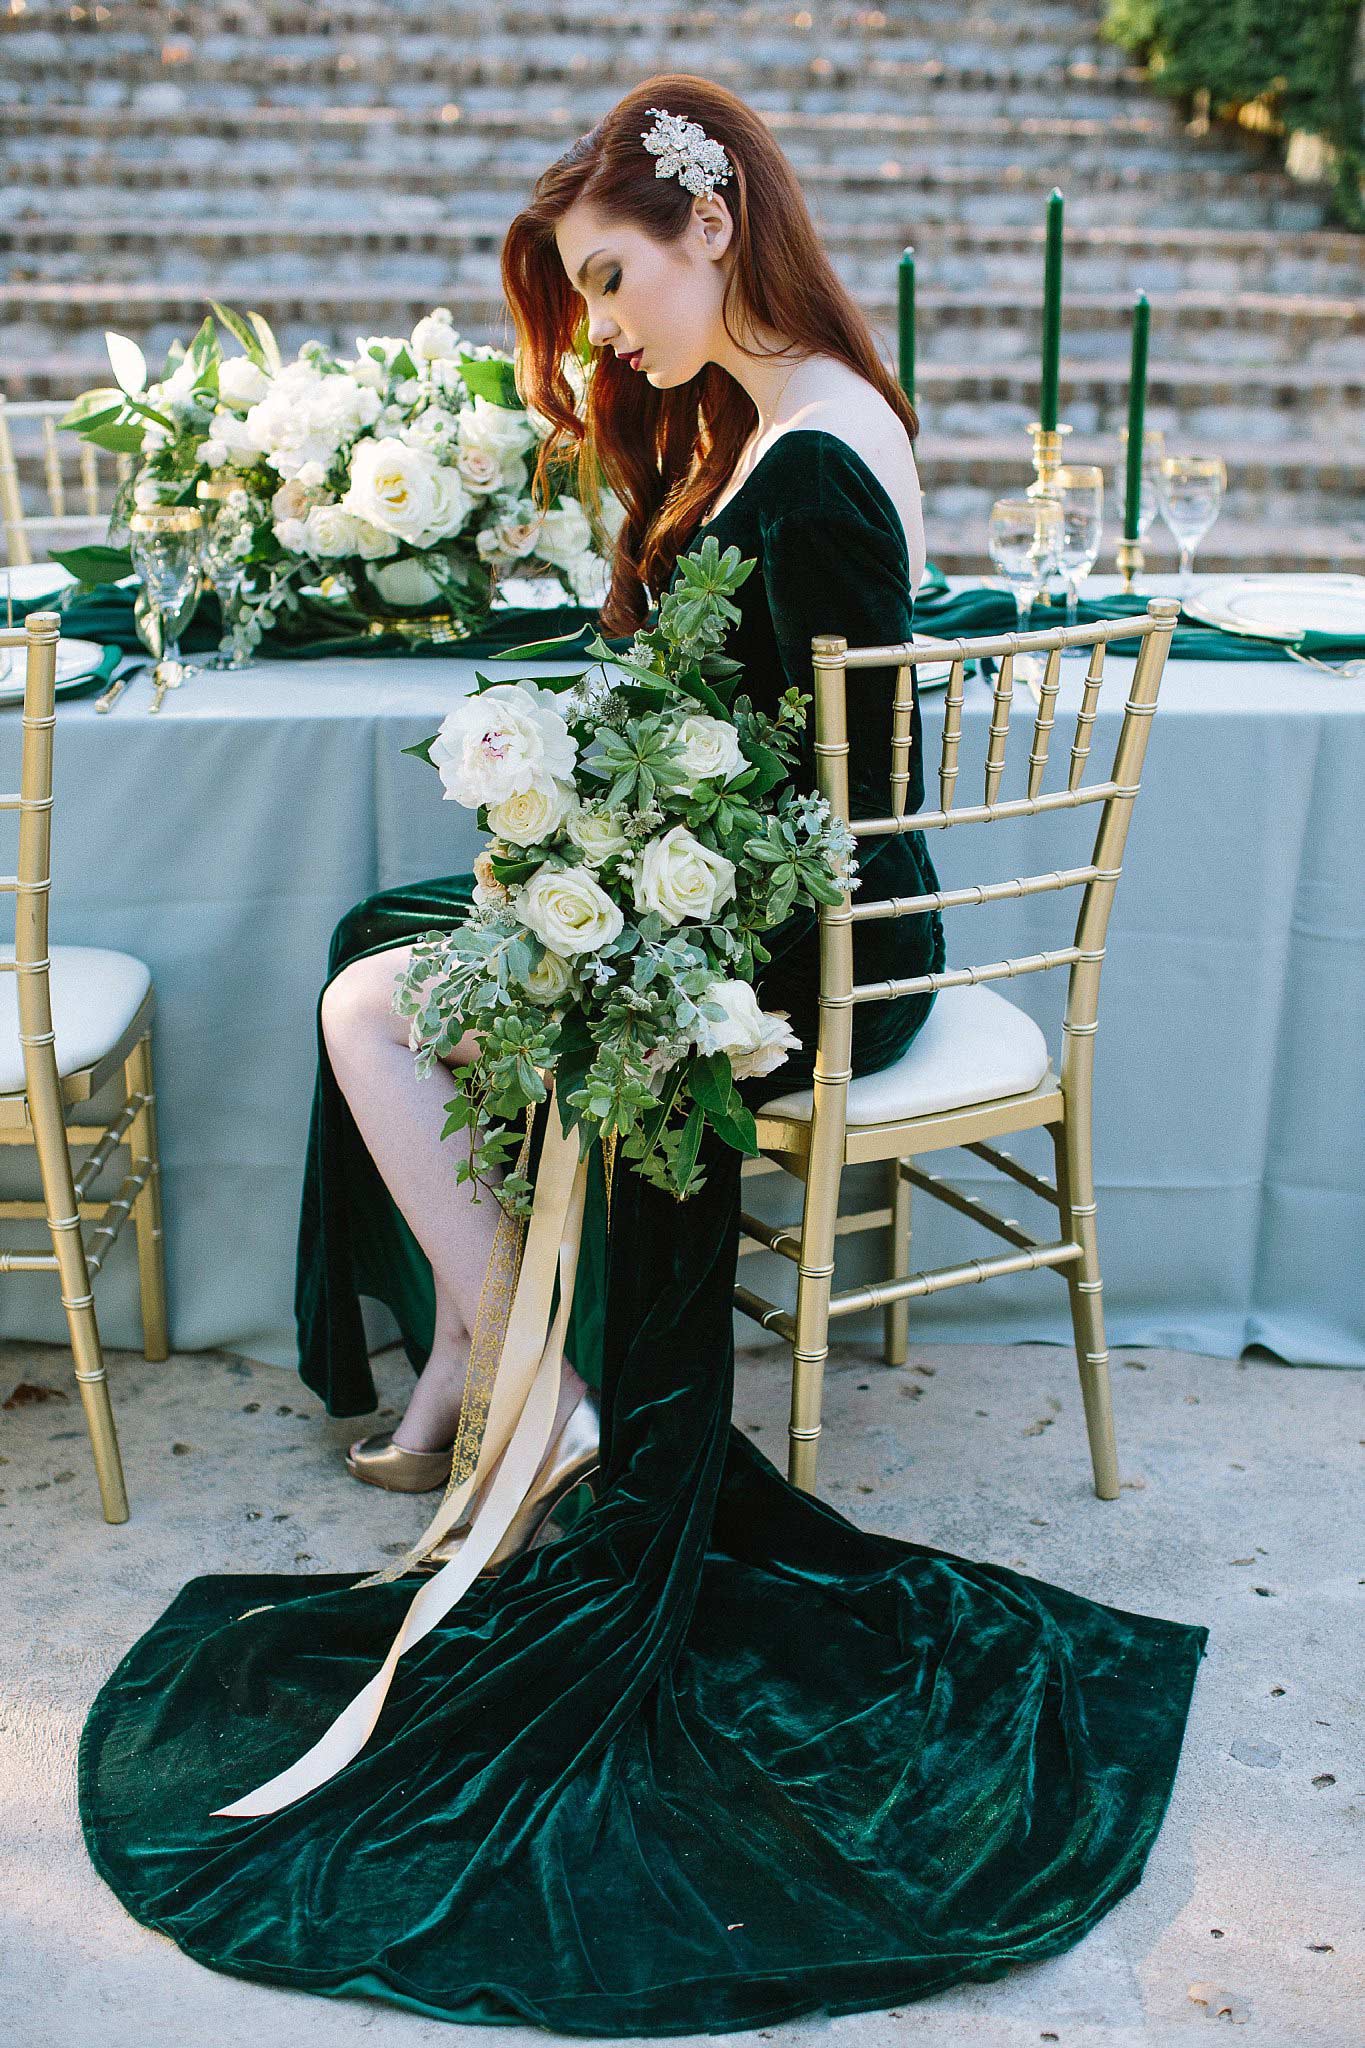 Greenery_Pantone-Color-of-the-Year-2017_Mansfield-TX_Aristide-Mansfield_Fort-Worth-and-Dallas-Wedding-Planner-and-Designer_Shannon-Rose-Events_0019.jpg